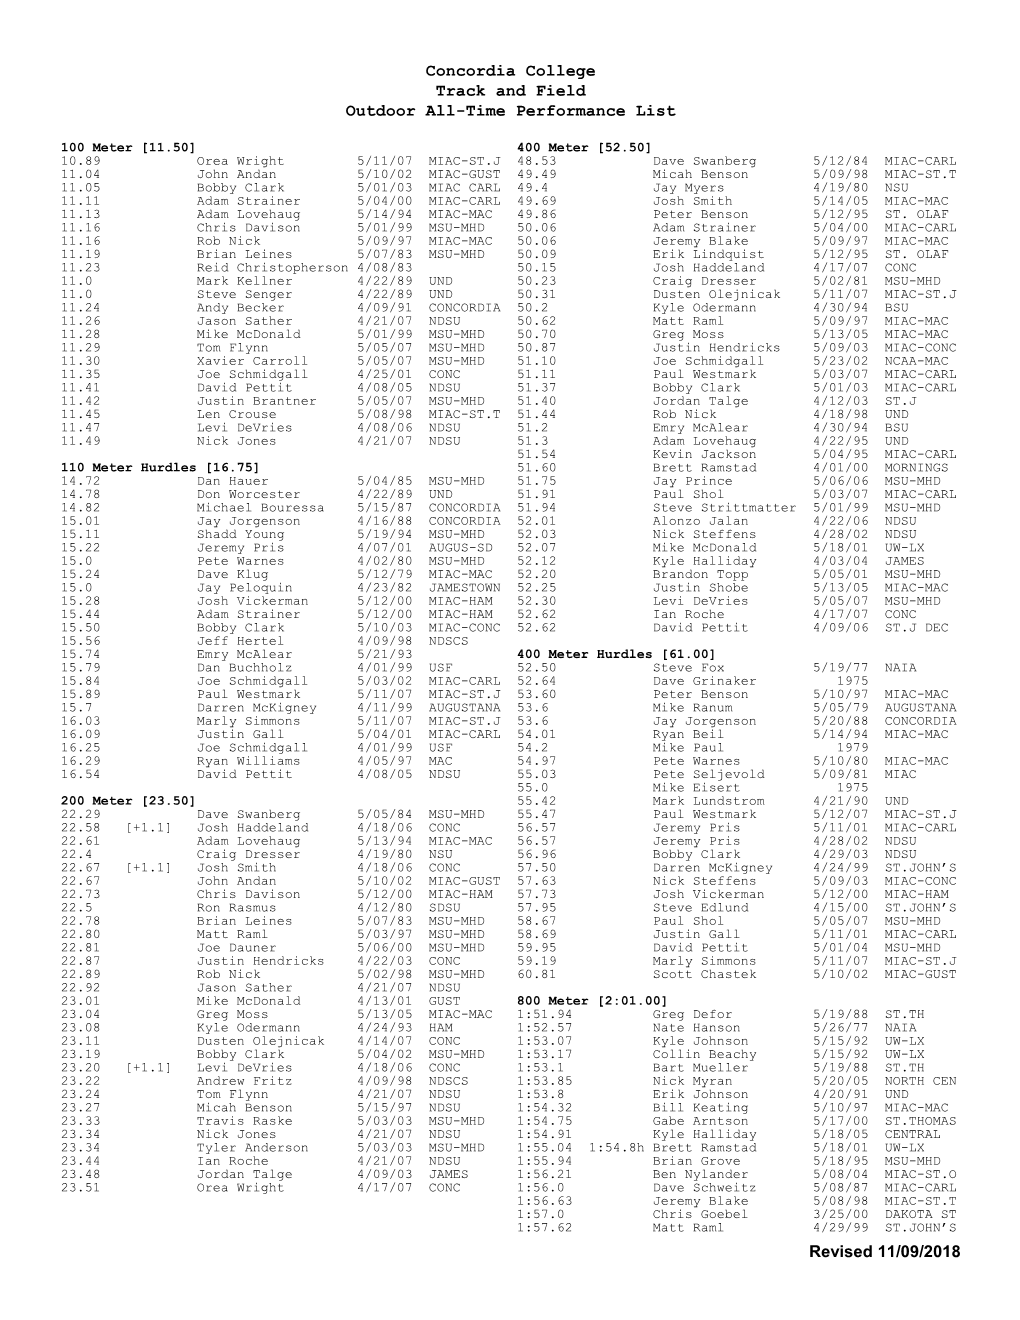 Outdoor All-Time Performance List